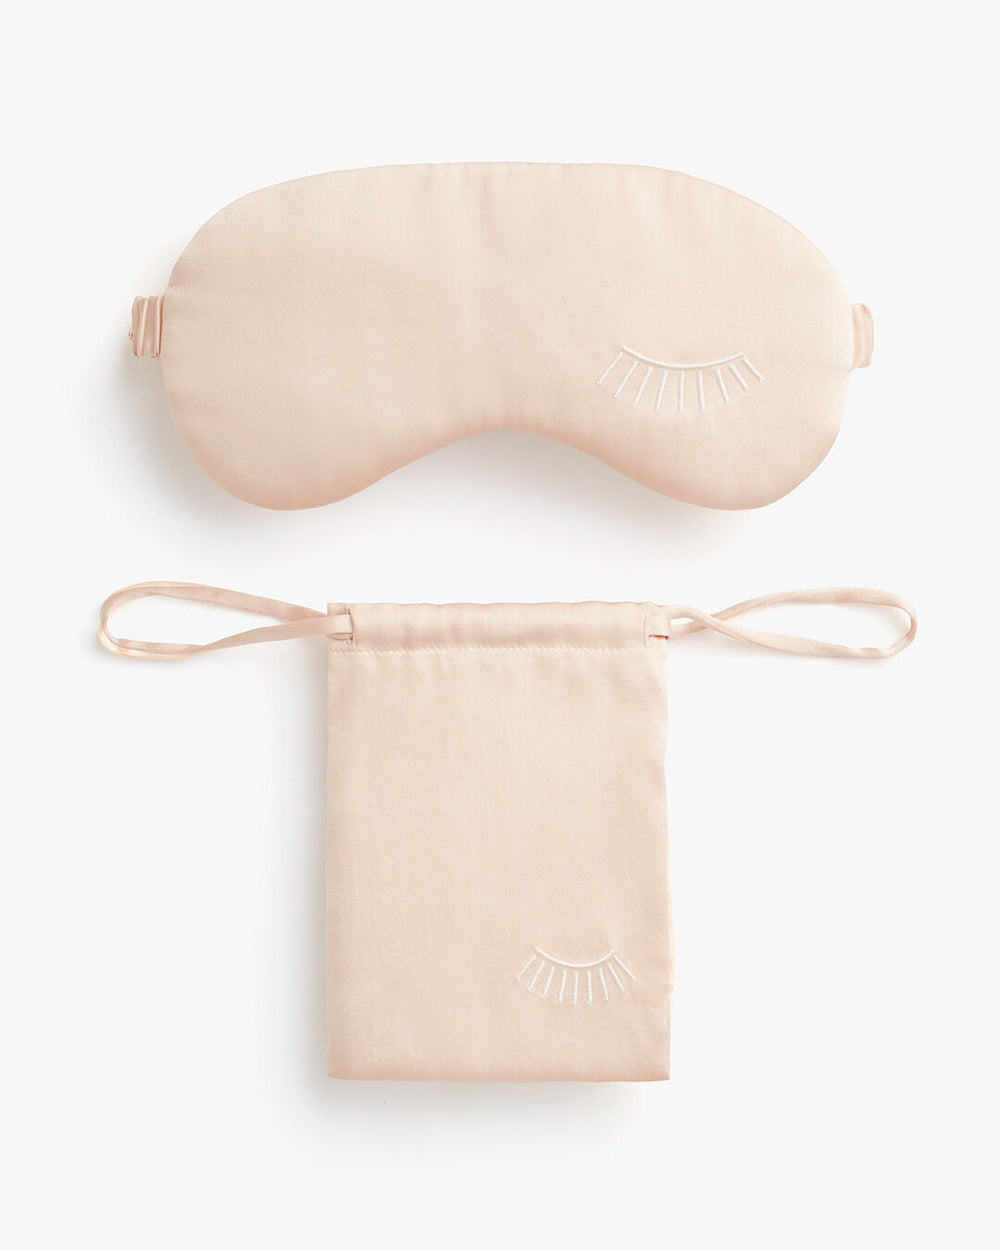 Sleep mask with lash design and matching storage pouch.